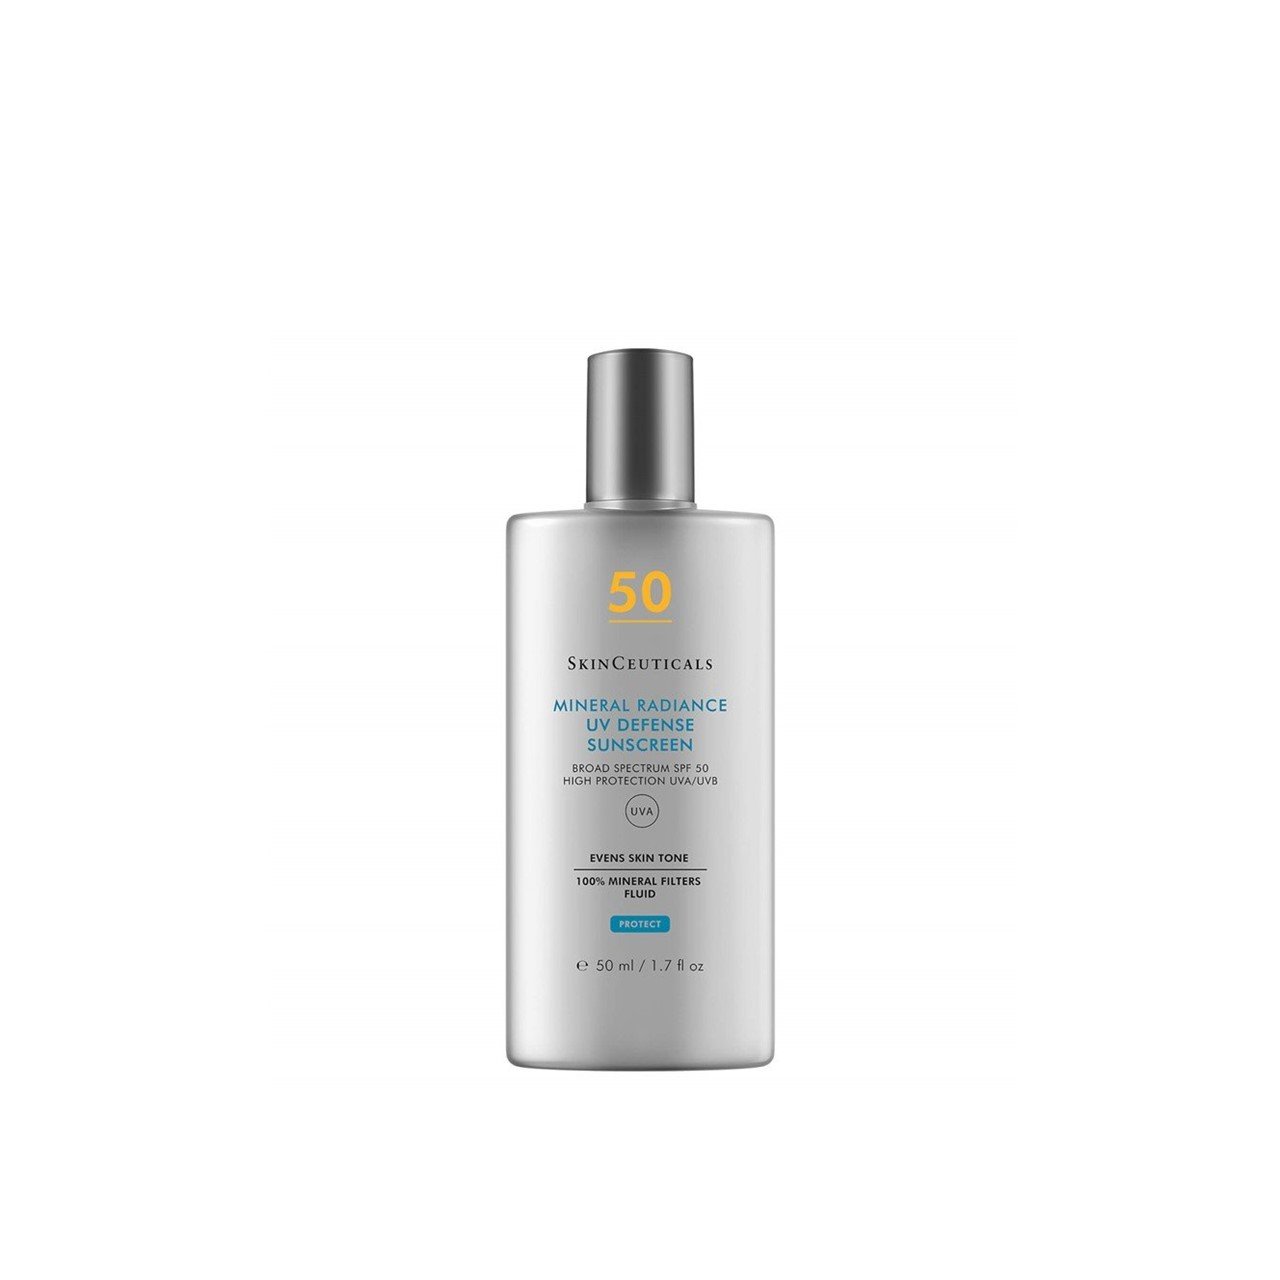 SkinCeuticals Protect Mineral Radiance UV Defense SPF50 50ml